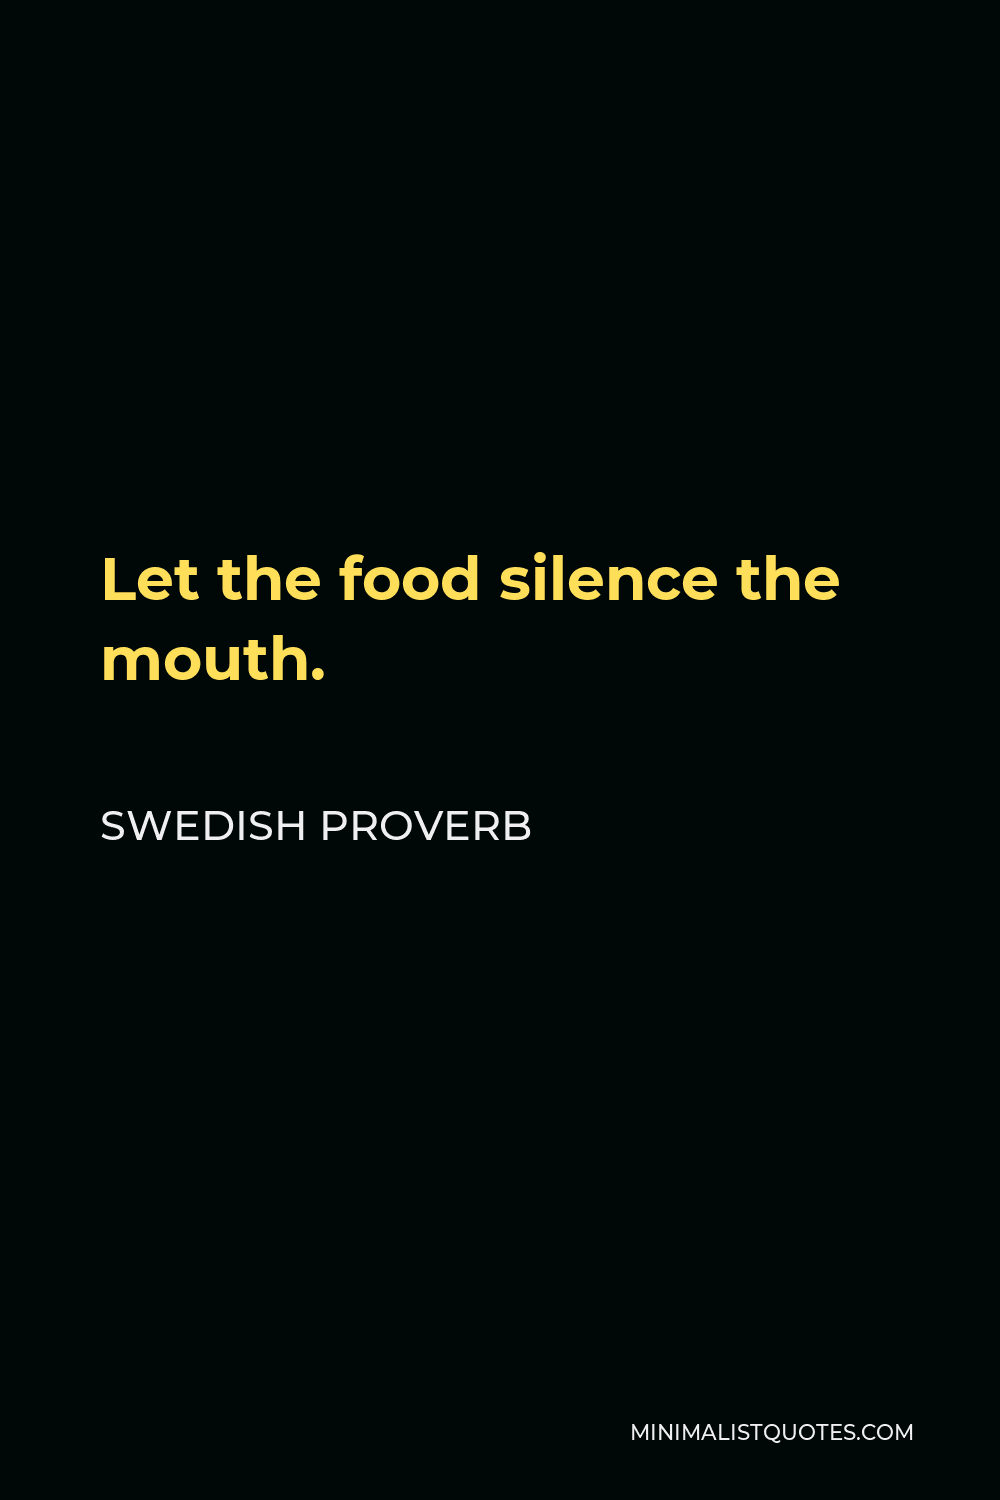 Swedish Proverb Quote - Let the food silence the mouth.